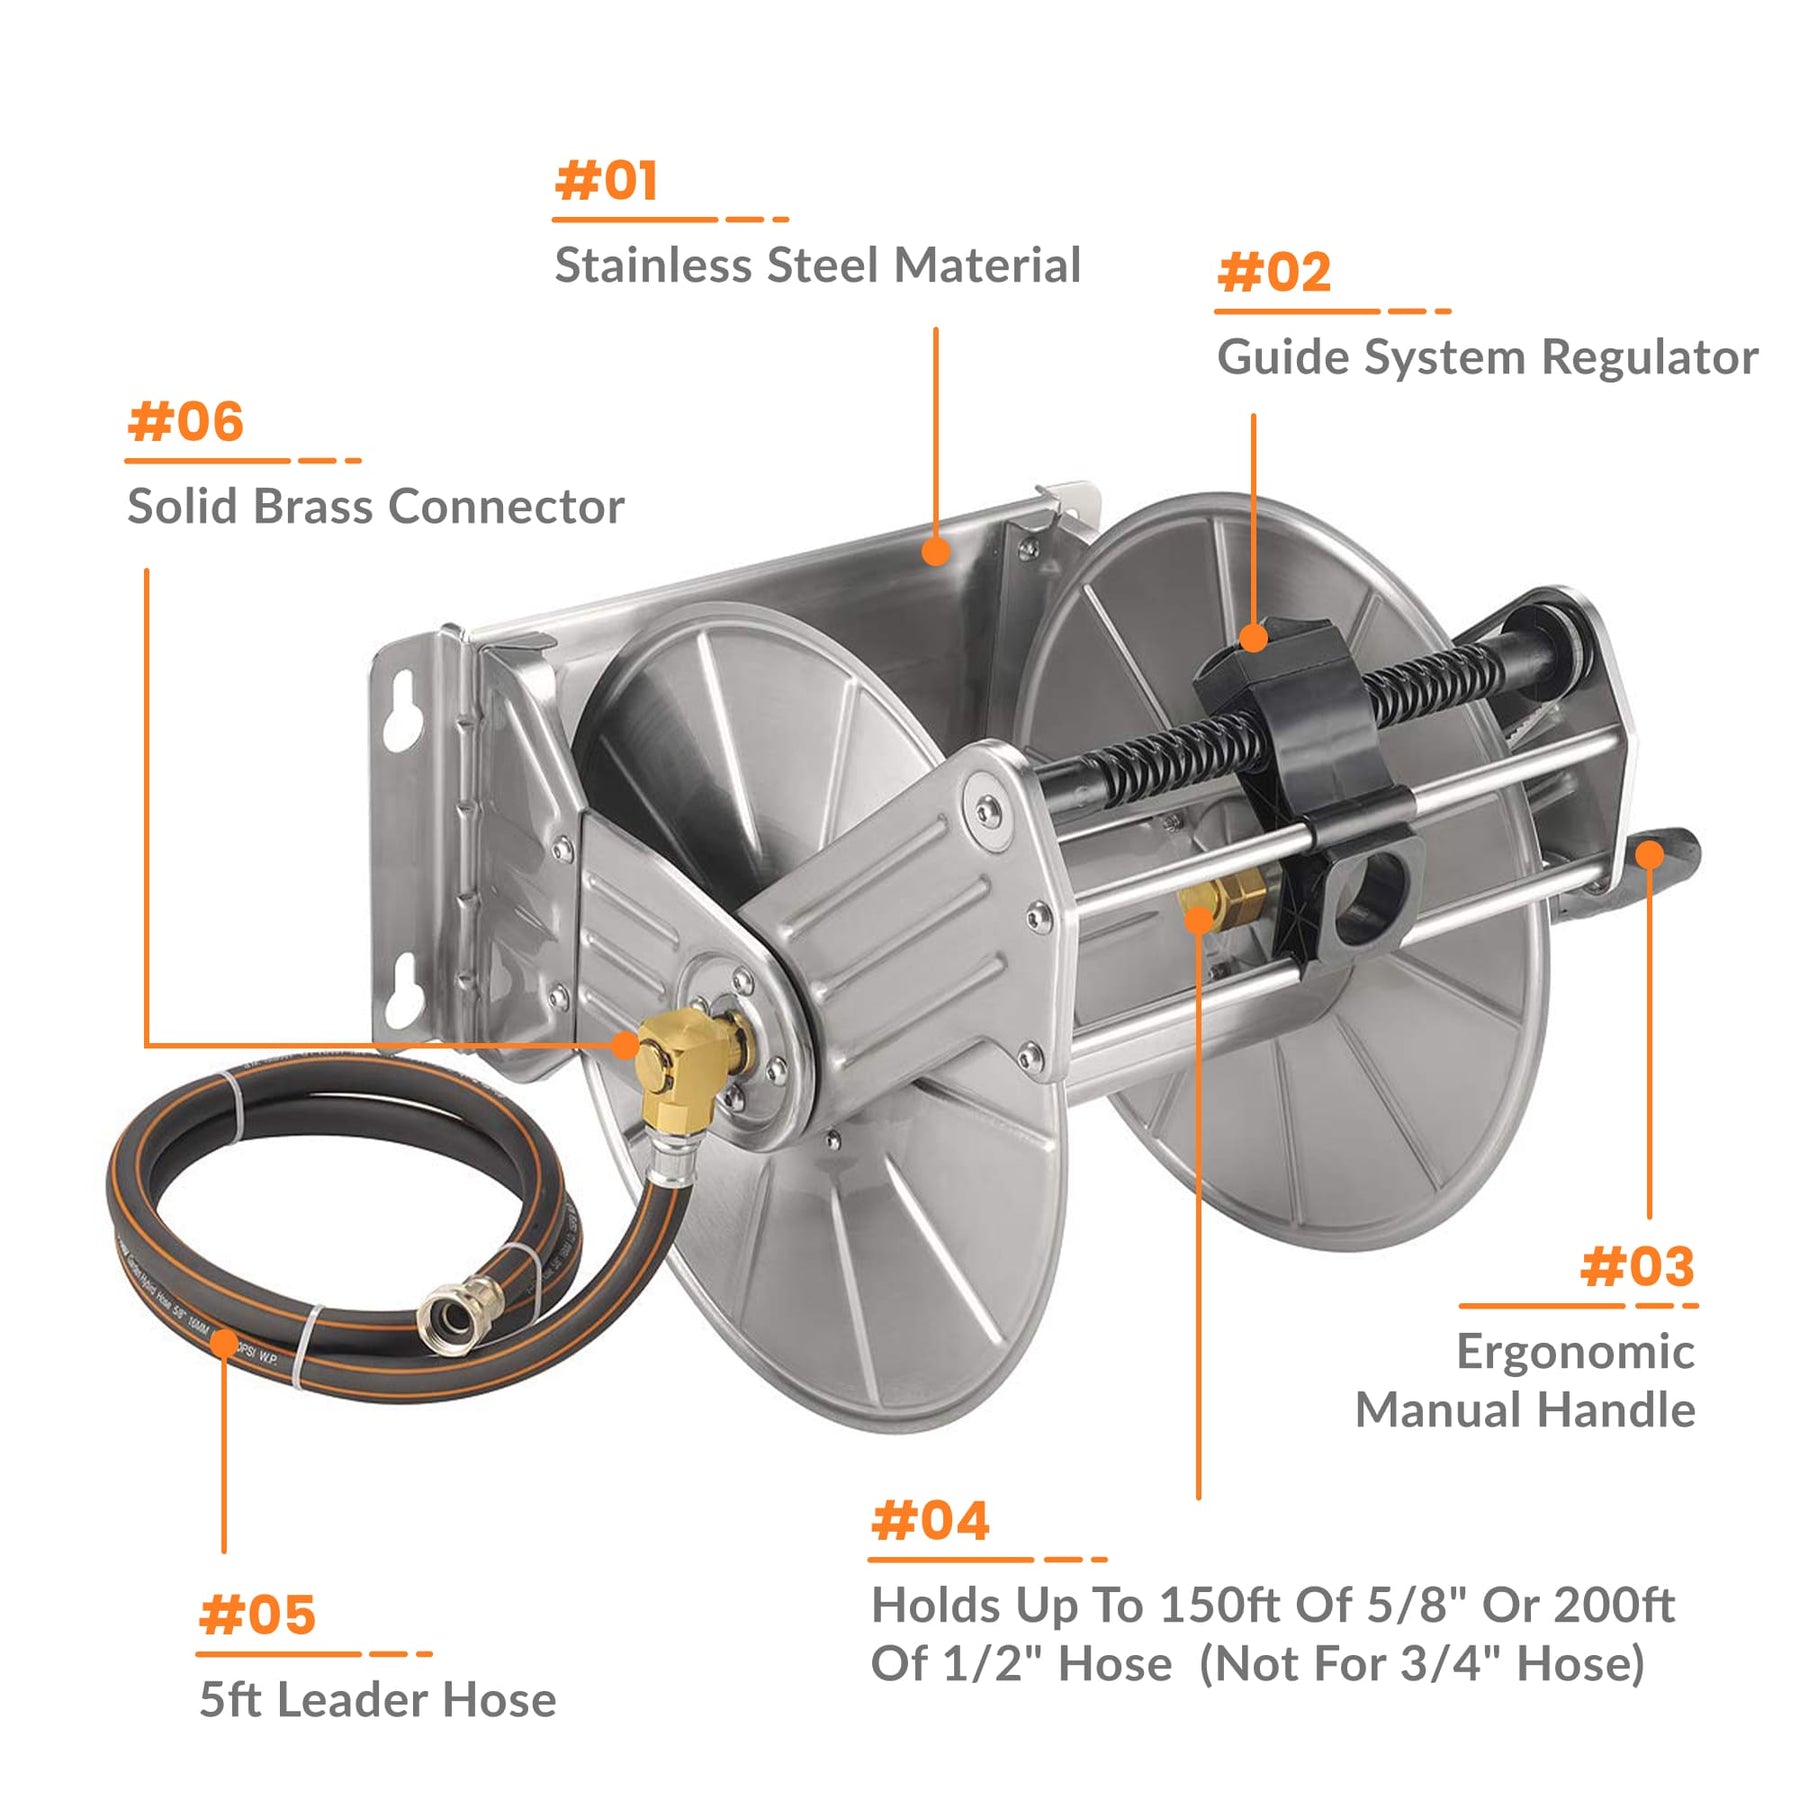 Hose Reel Wall Mount, Commercial-Grade with 200ft Capacity